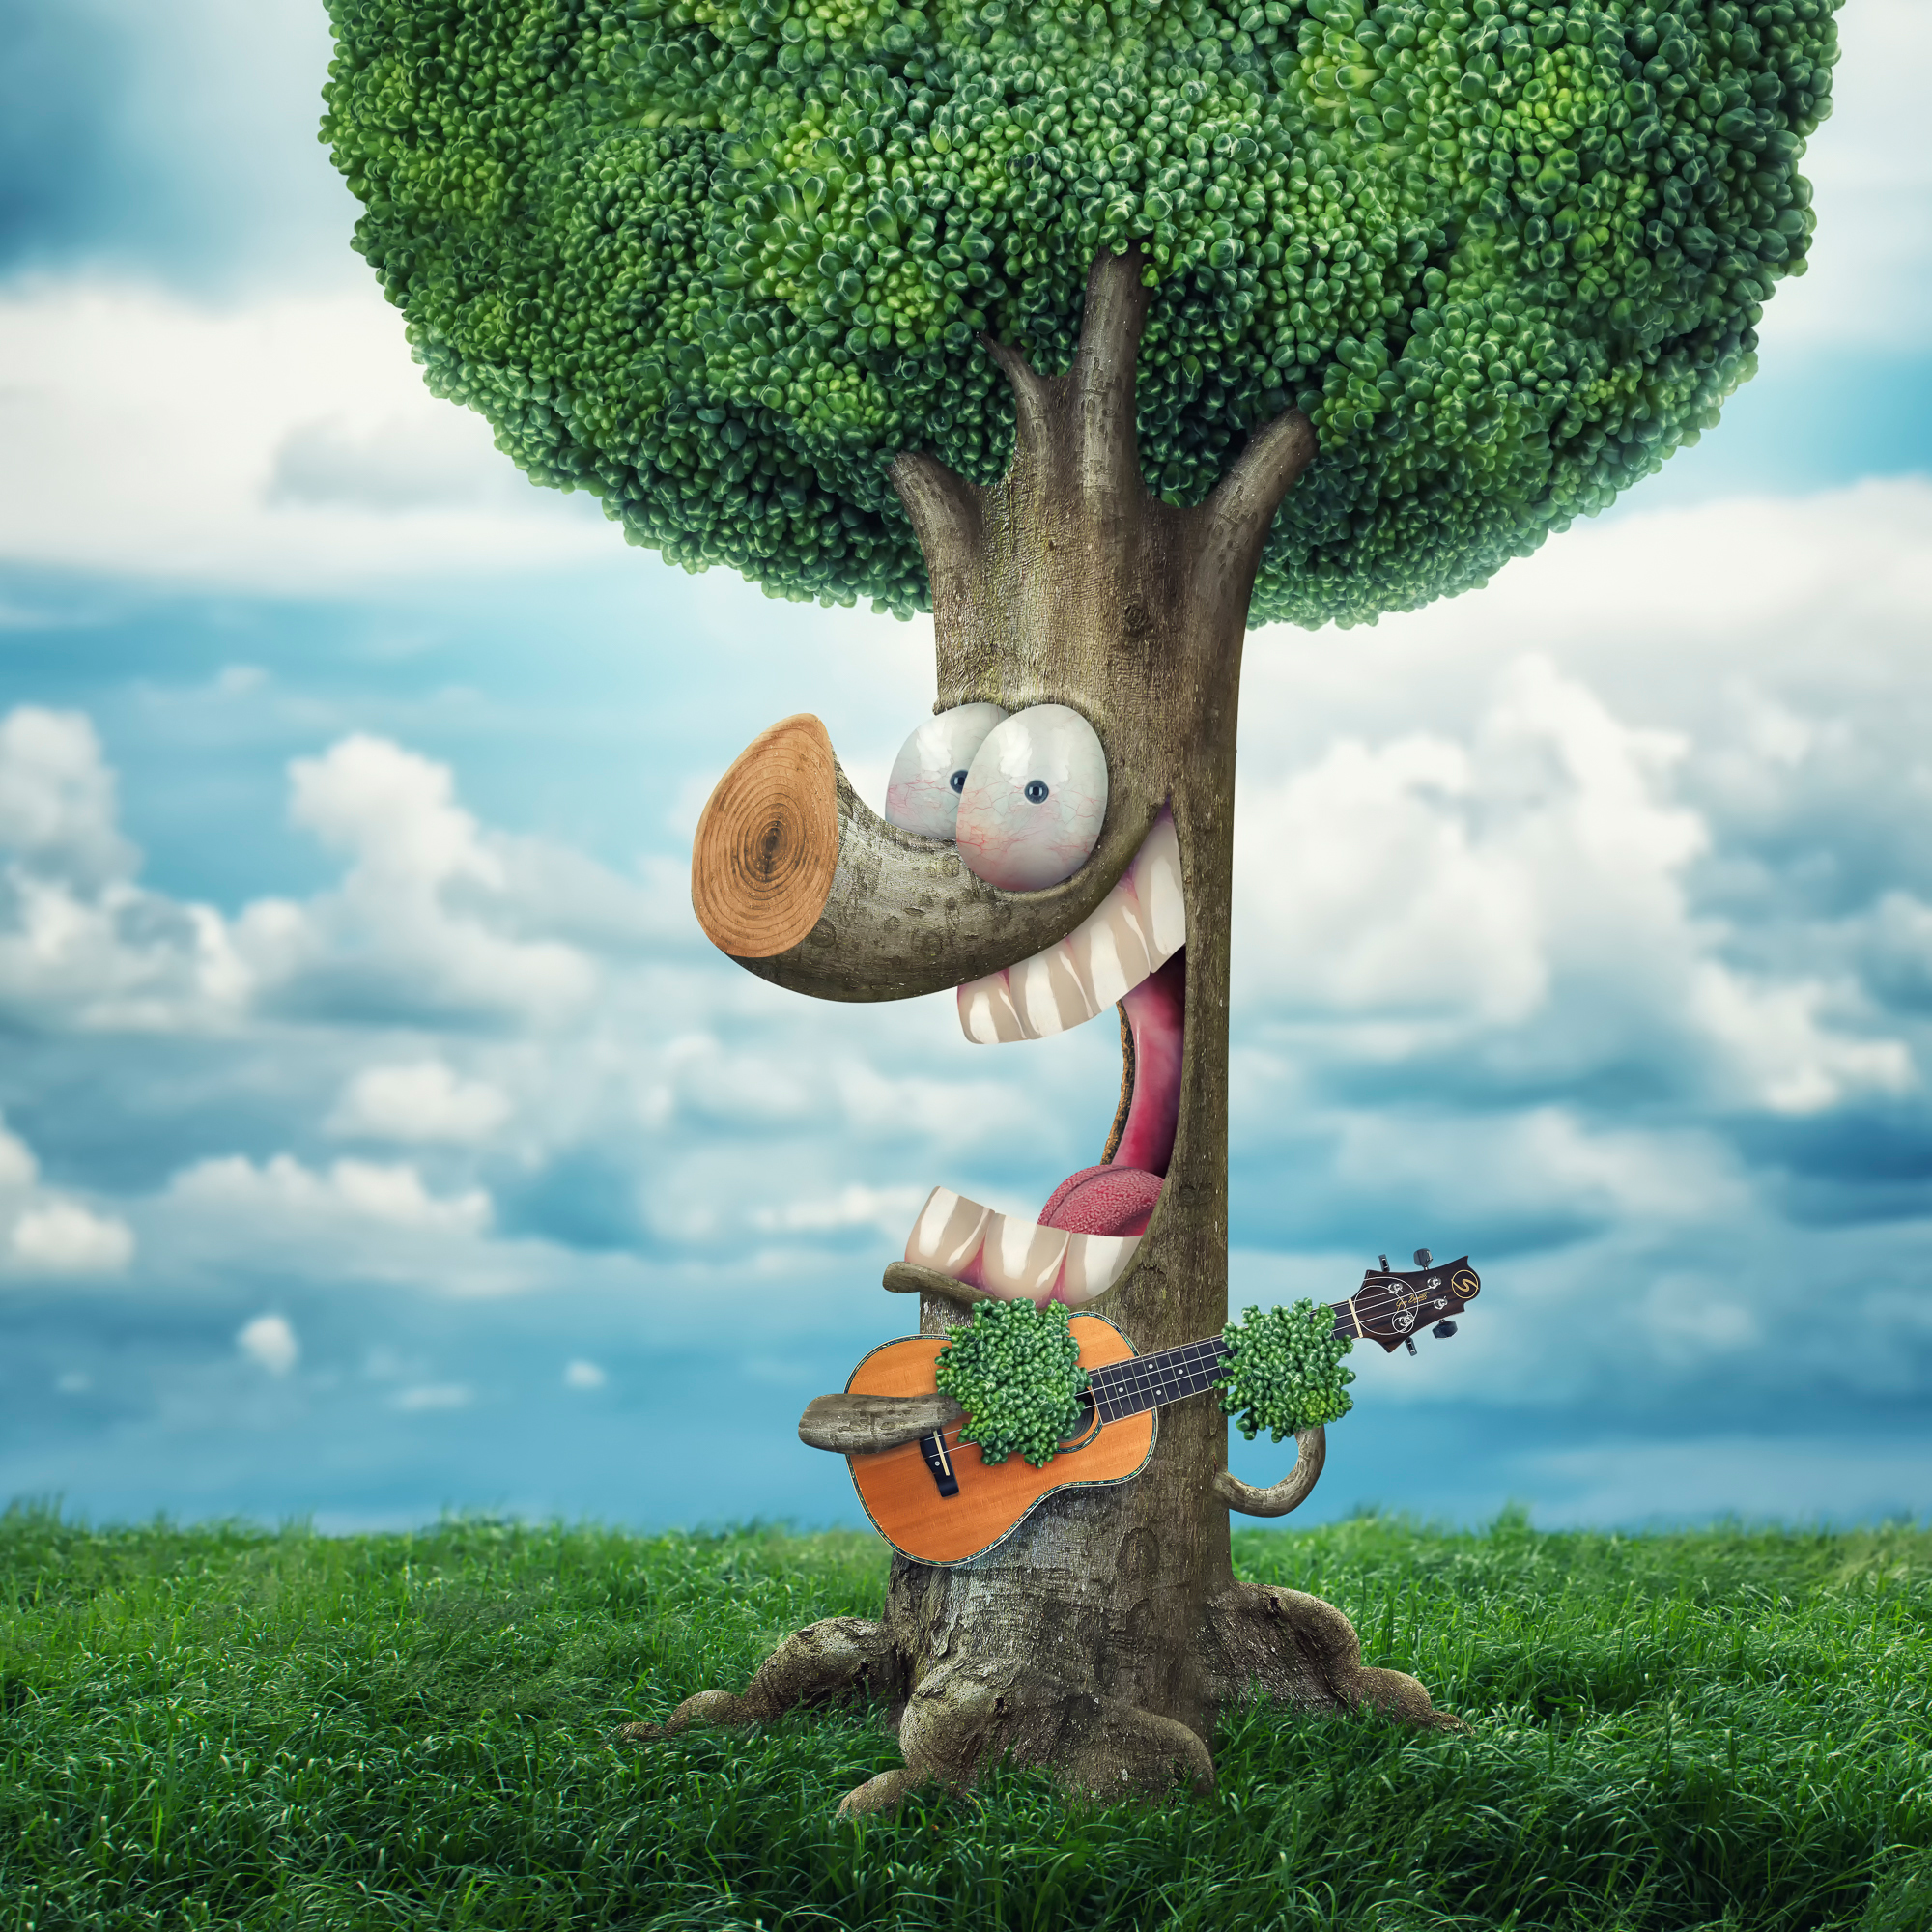 Download wallpaper tree, guitar, humor, song, section music 